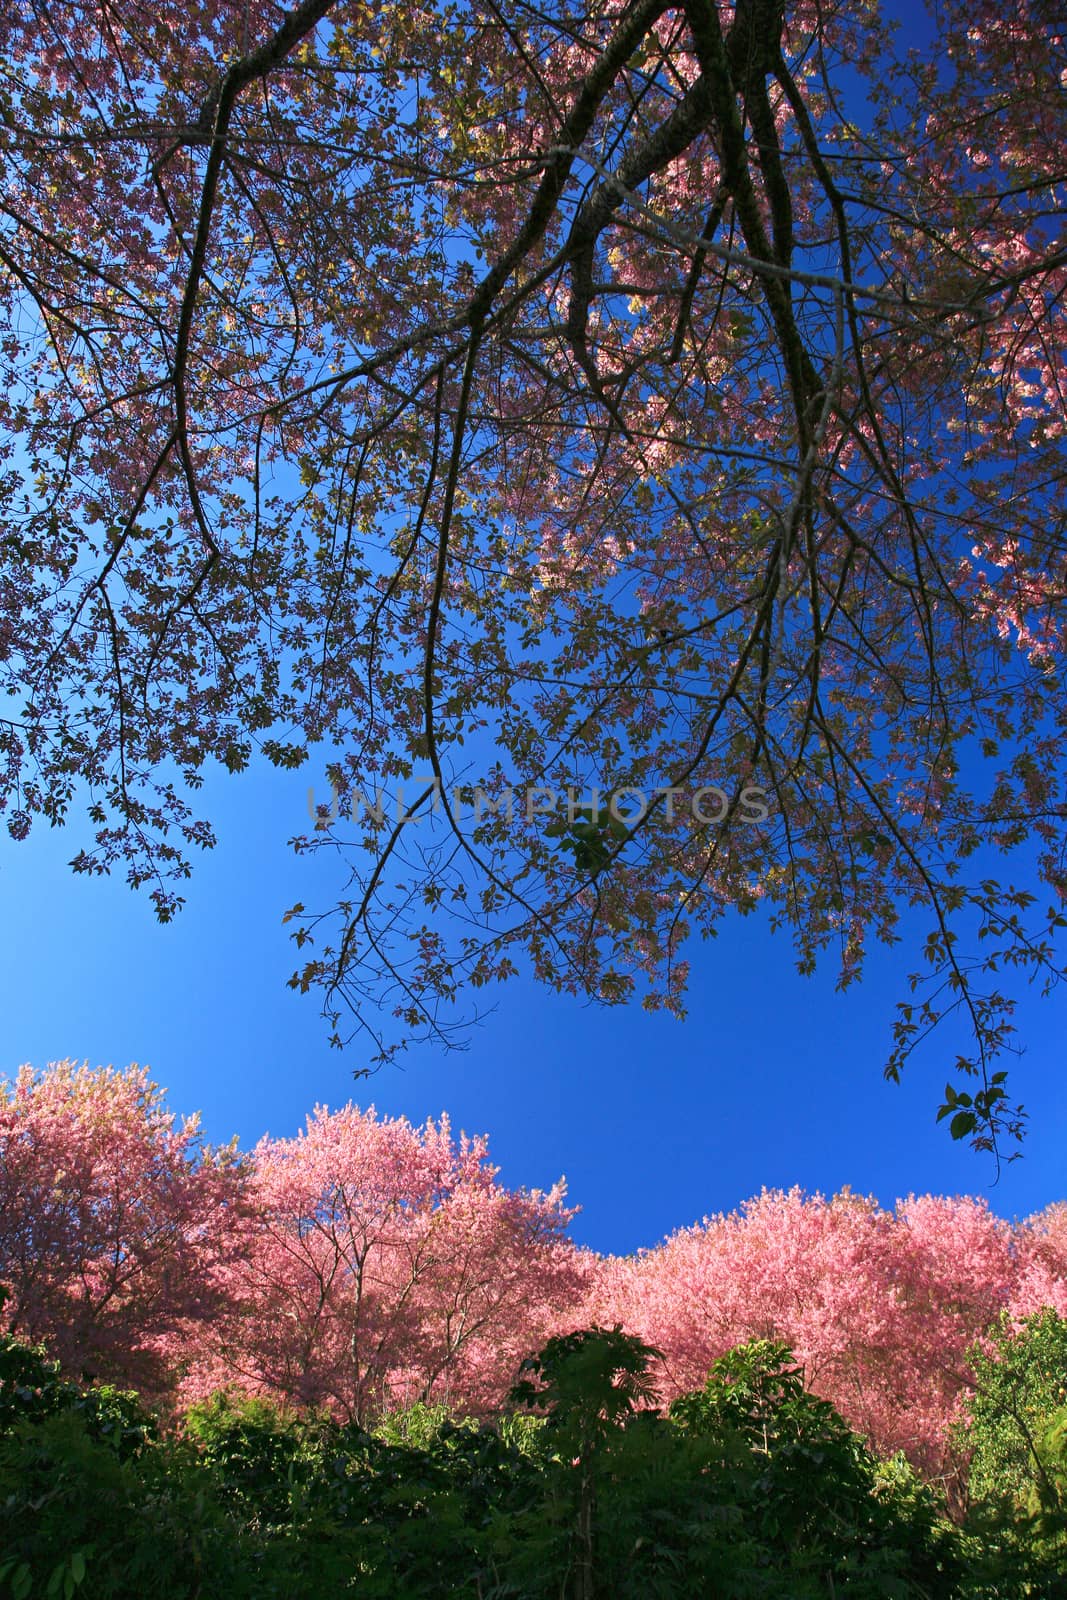 Sakura pink flower on mountain in thailand, cherry blossom by think4photop